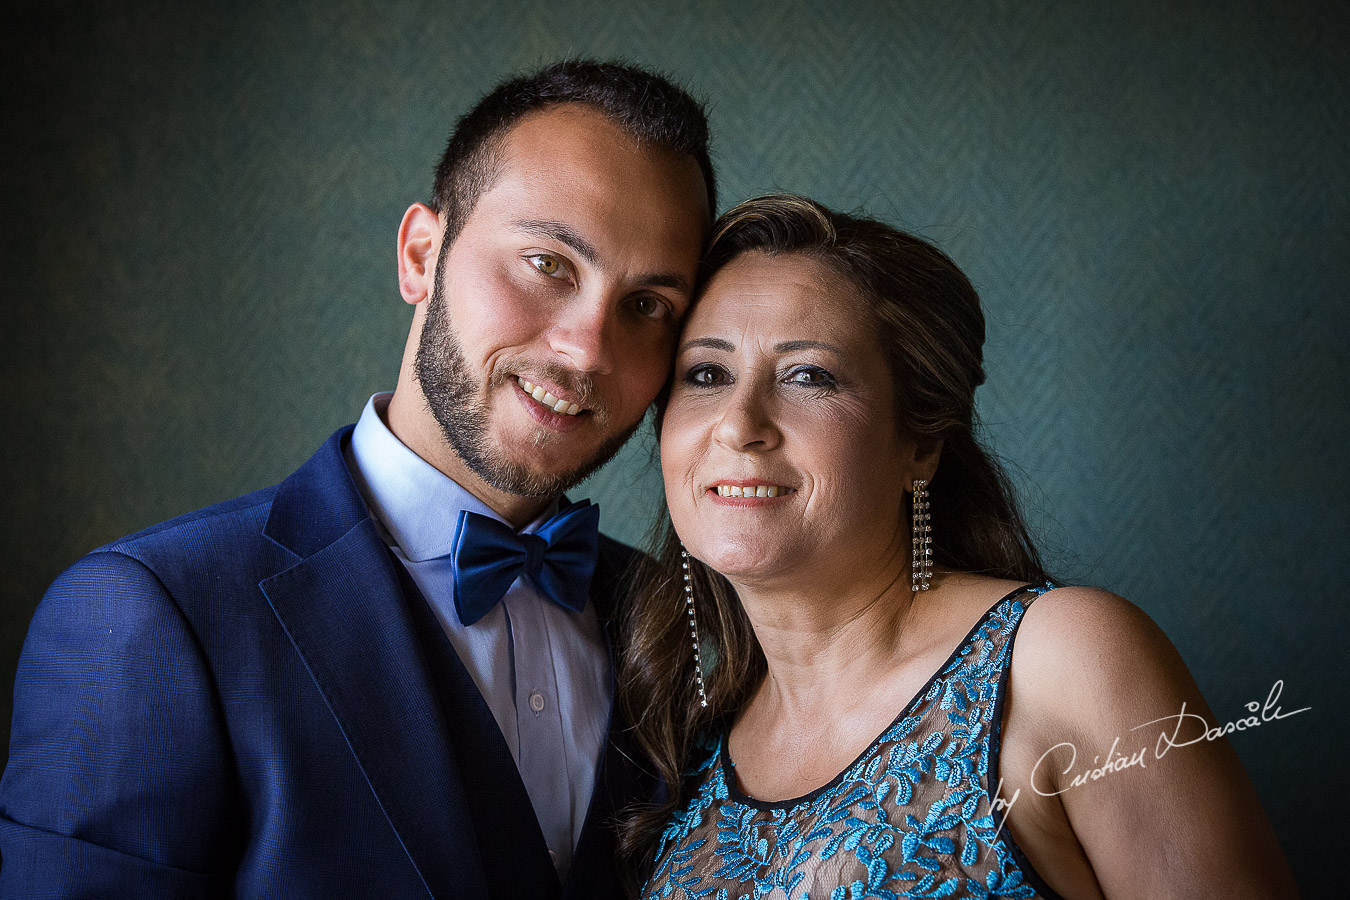 Genuine moments with the groom and his mother, as part of an Exclusive Wedding photography at Grand Resort Limassol, captured by Cyprus Wedding Photographer Cristian Dascalu.